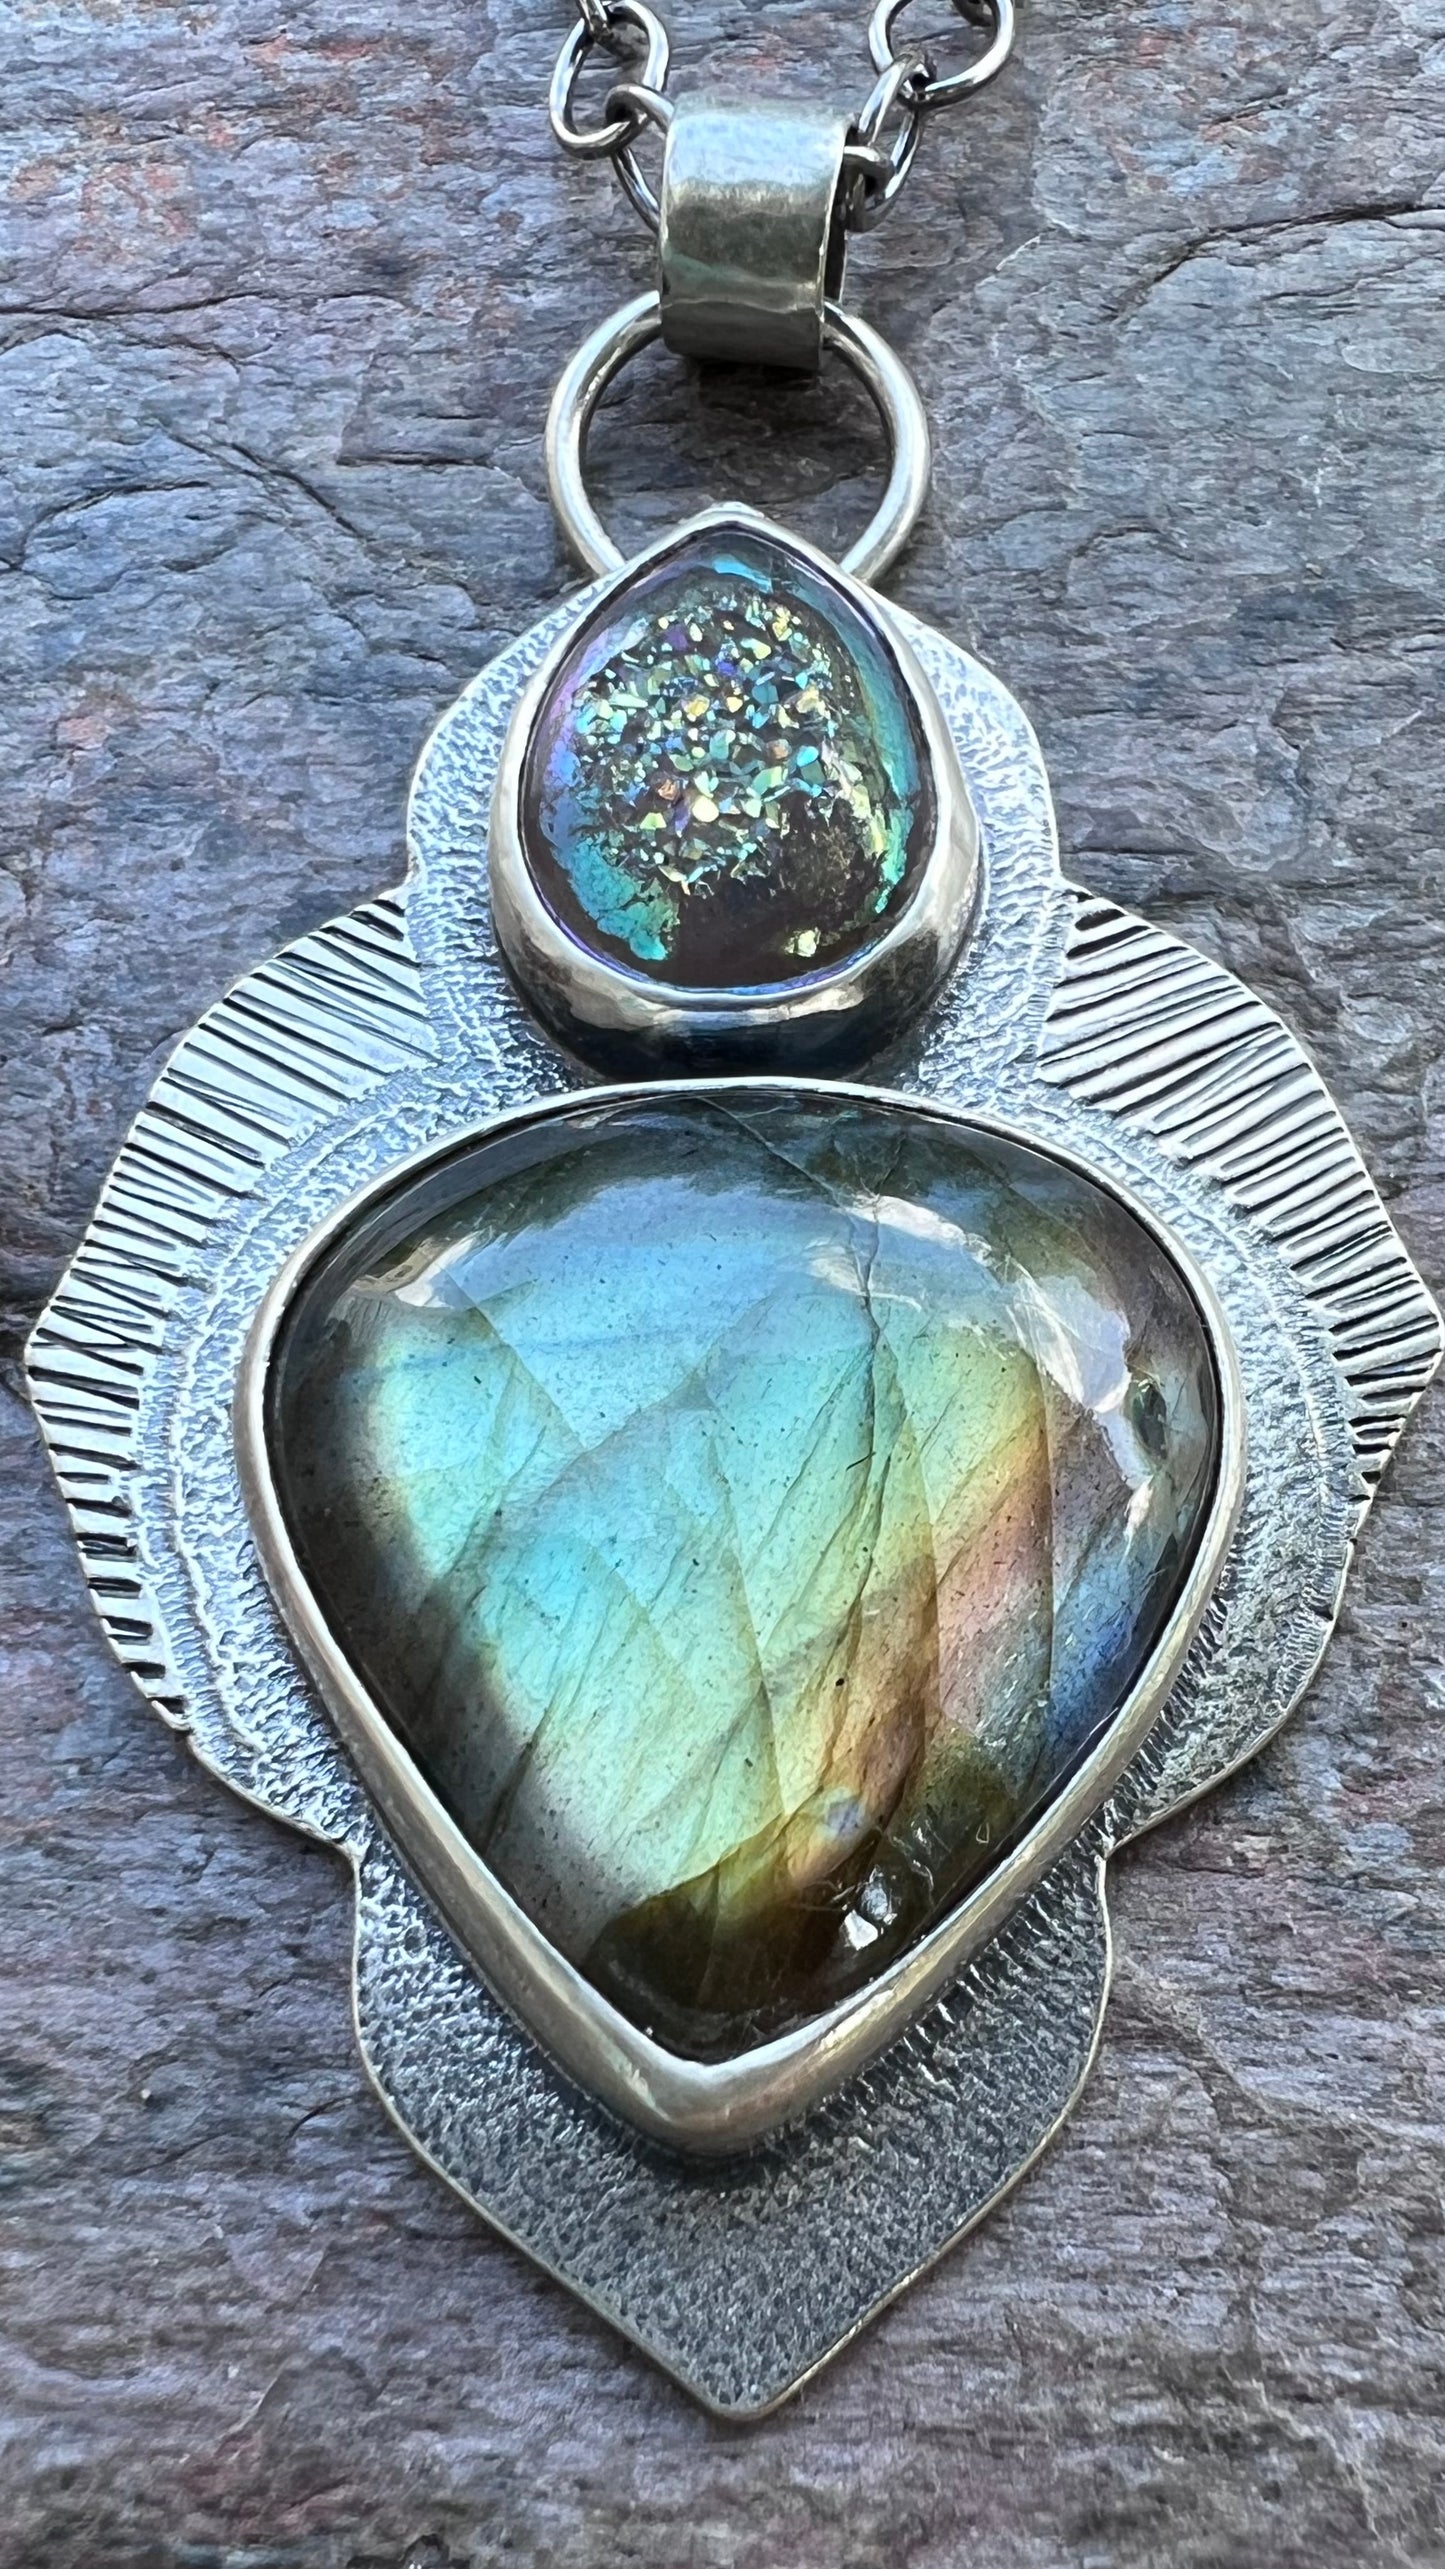 Labradorite and Agate Druzy Sterling Silver Necklace - One-of-a-Kind Handmade Pendant on Sterling Silver Chain